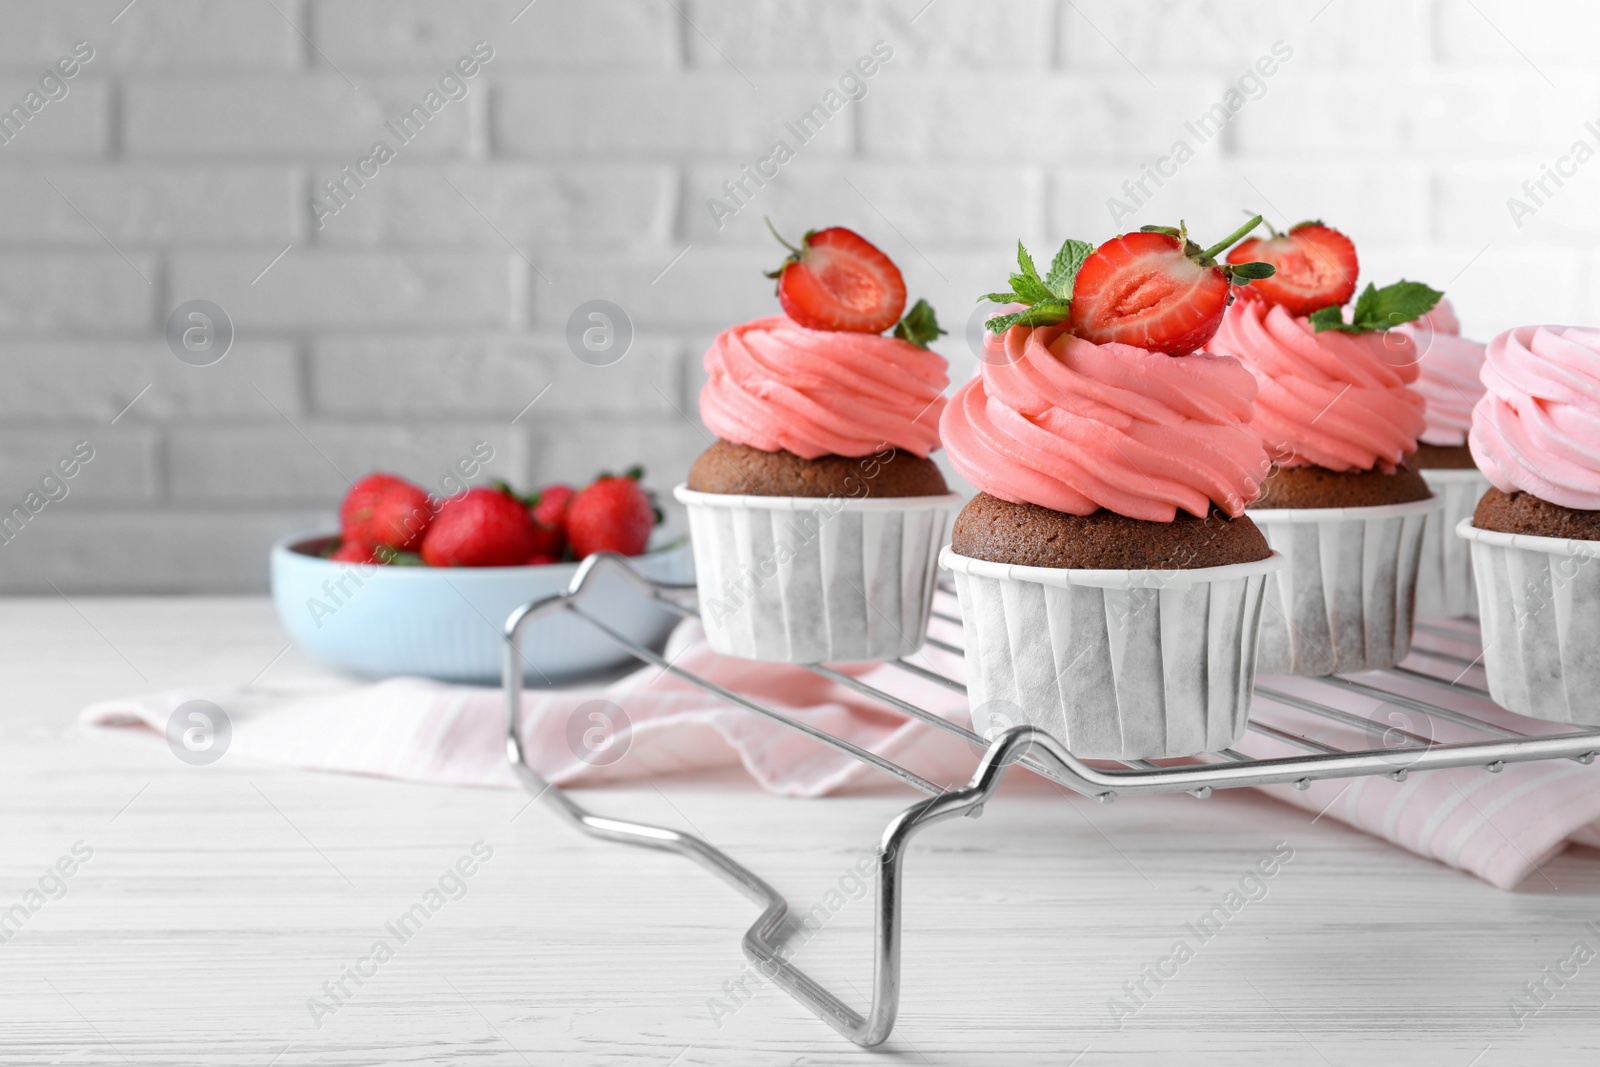 Photo of Delicious cupcakes with cream and strawberries on white wooden table. Space for text